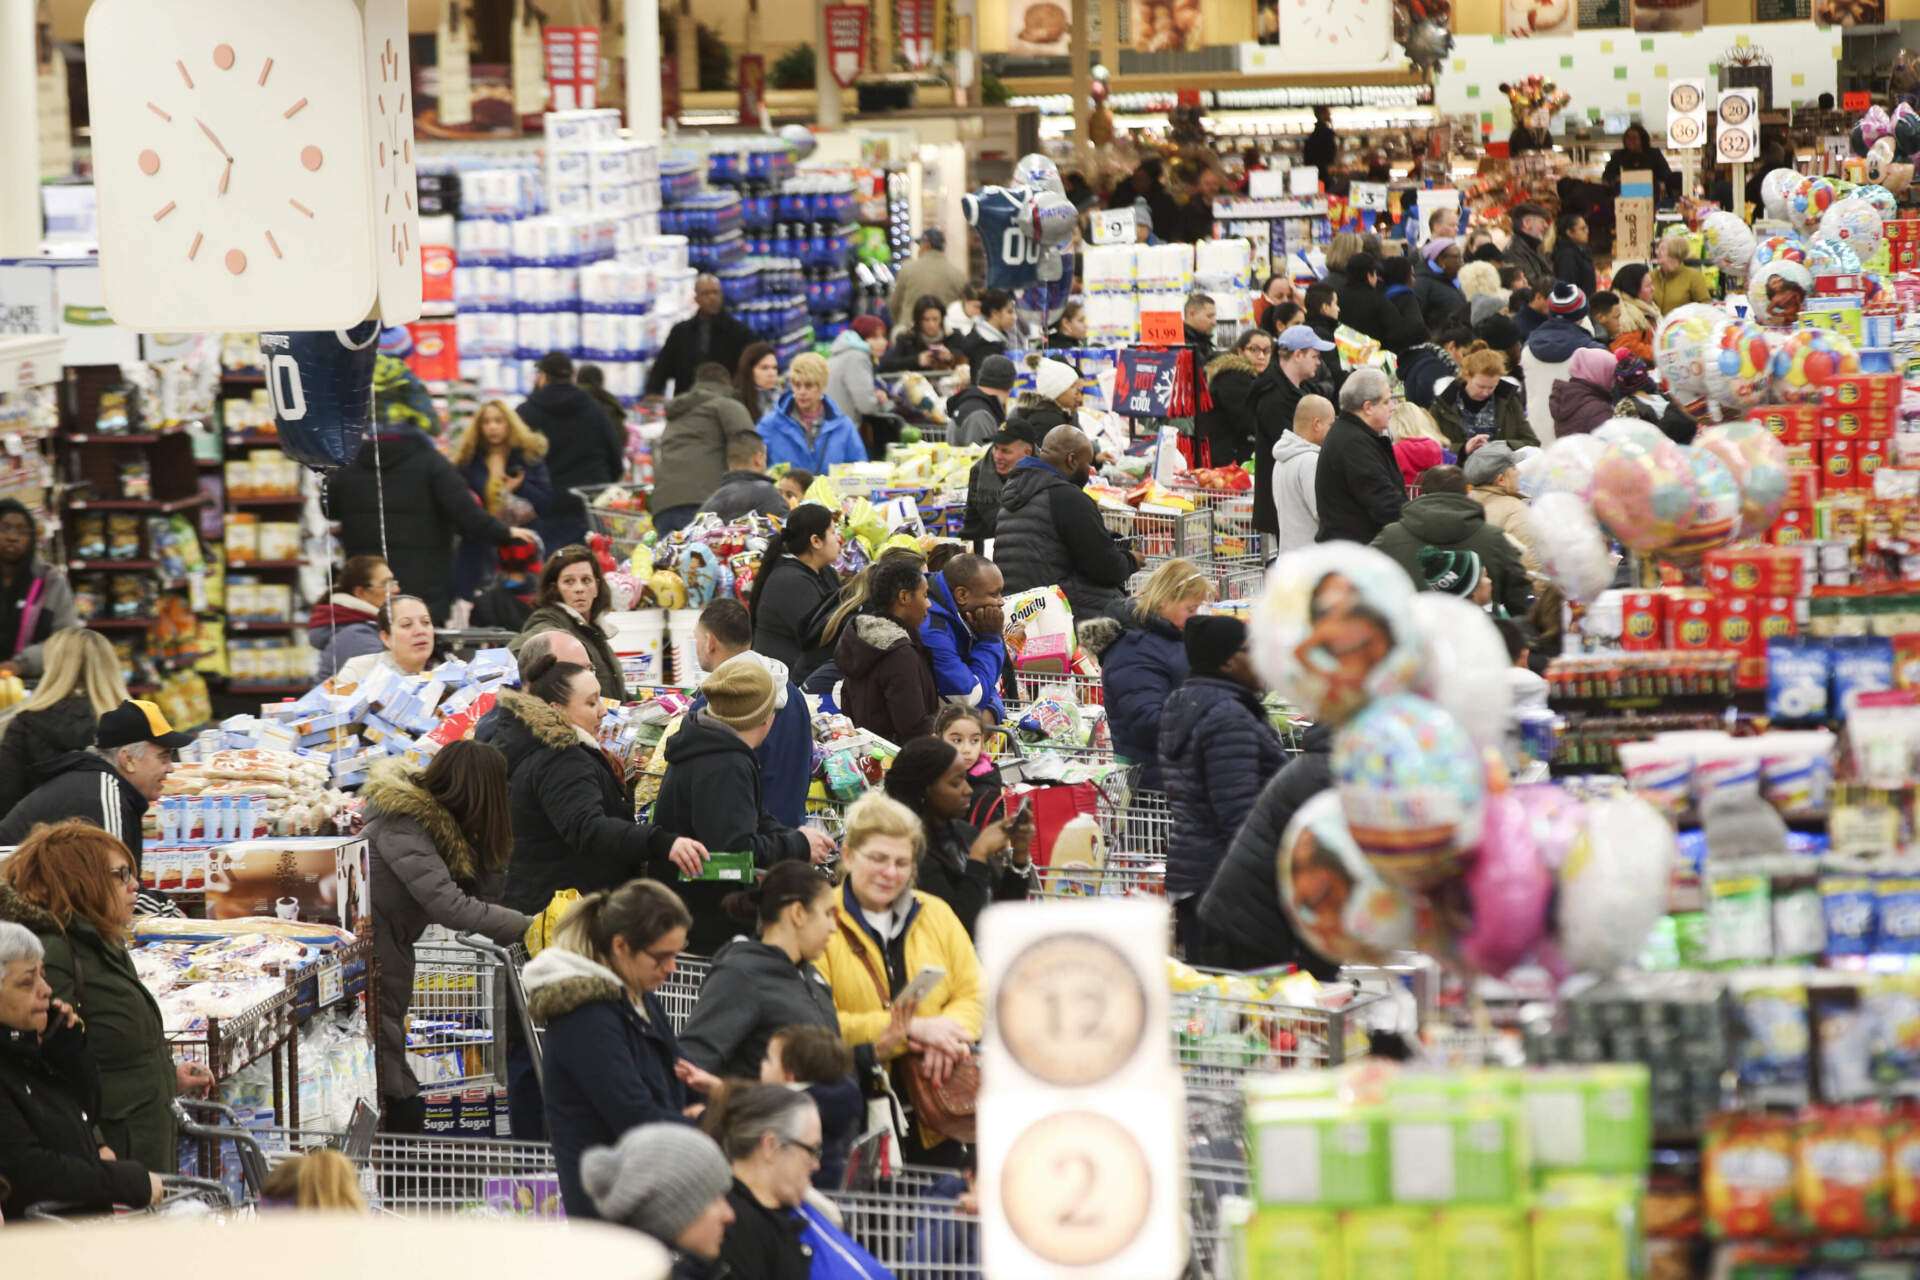 Shoppers stock up at the Chelsea Market Basket. (Nicolaus Czarnecki/MediaNews Group/Boston Herald via Getty Images)